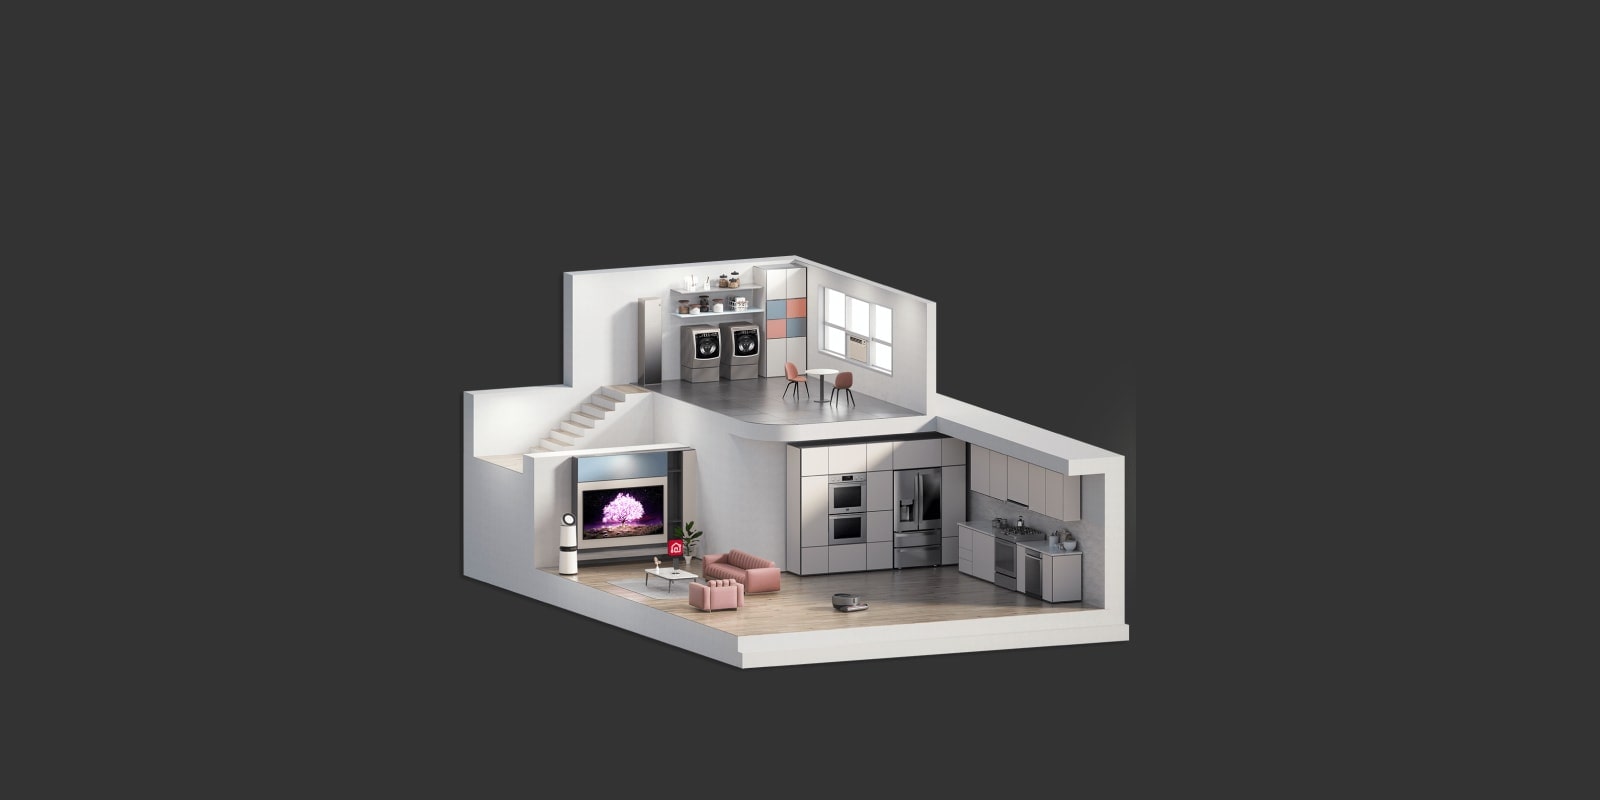 Image shows a cross-section of a model house and the different rooms within it.